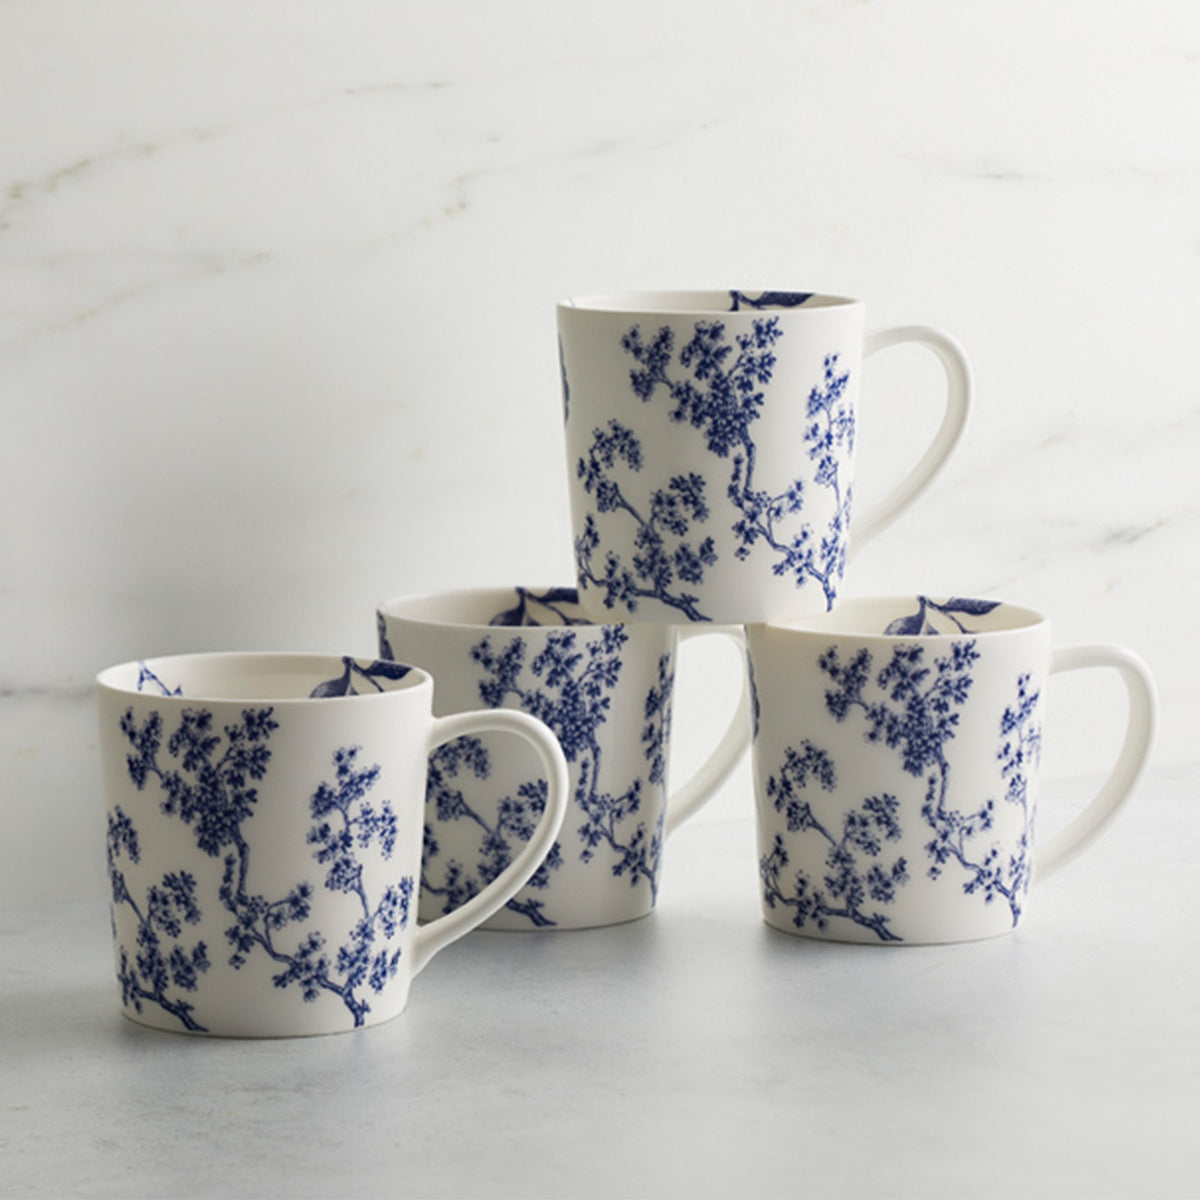 Four Chinoiserie Toile Mugs by Caskata Artisanal Home, with blue floral patterns, reminiscent of Chinoiserie Toile, are stacked and arranged on a white surface against a light, marbled background.